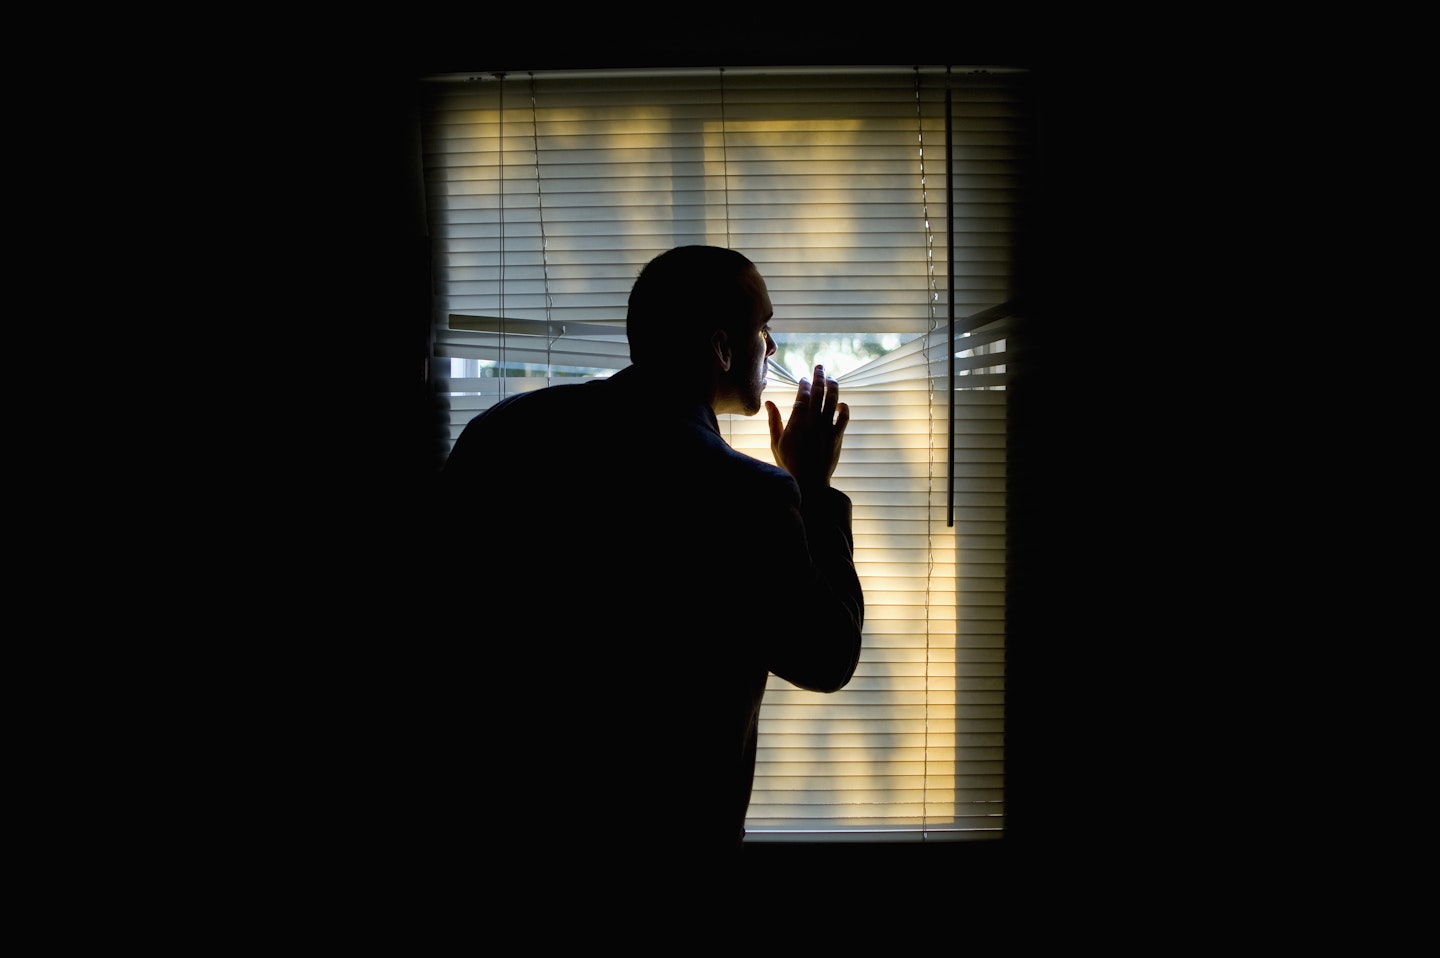 Silhouette of man peers out of window